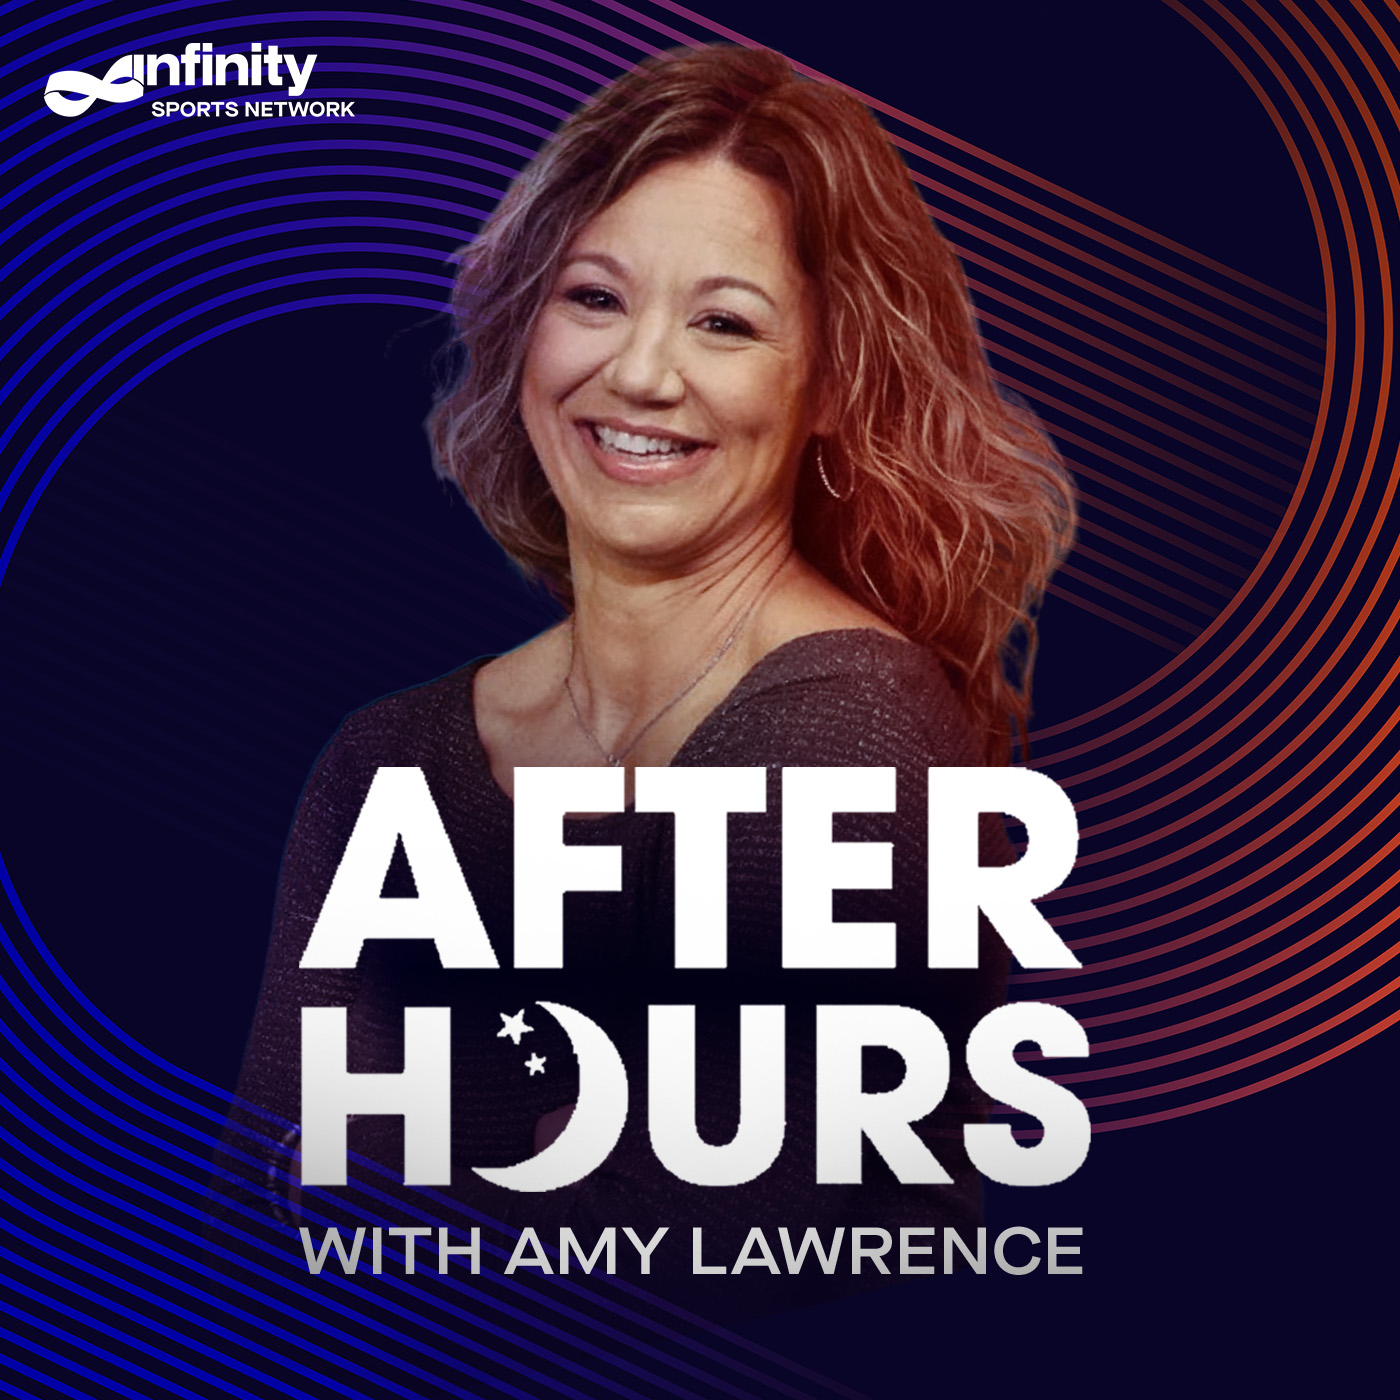 5/24/21 After Hours with Amy Lawrence PODCAST: Hour 2